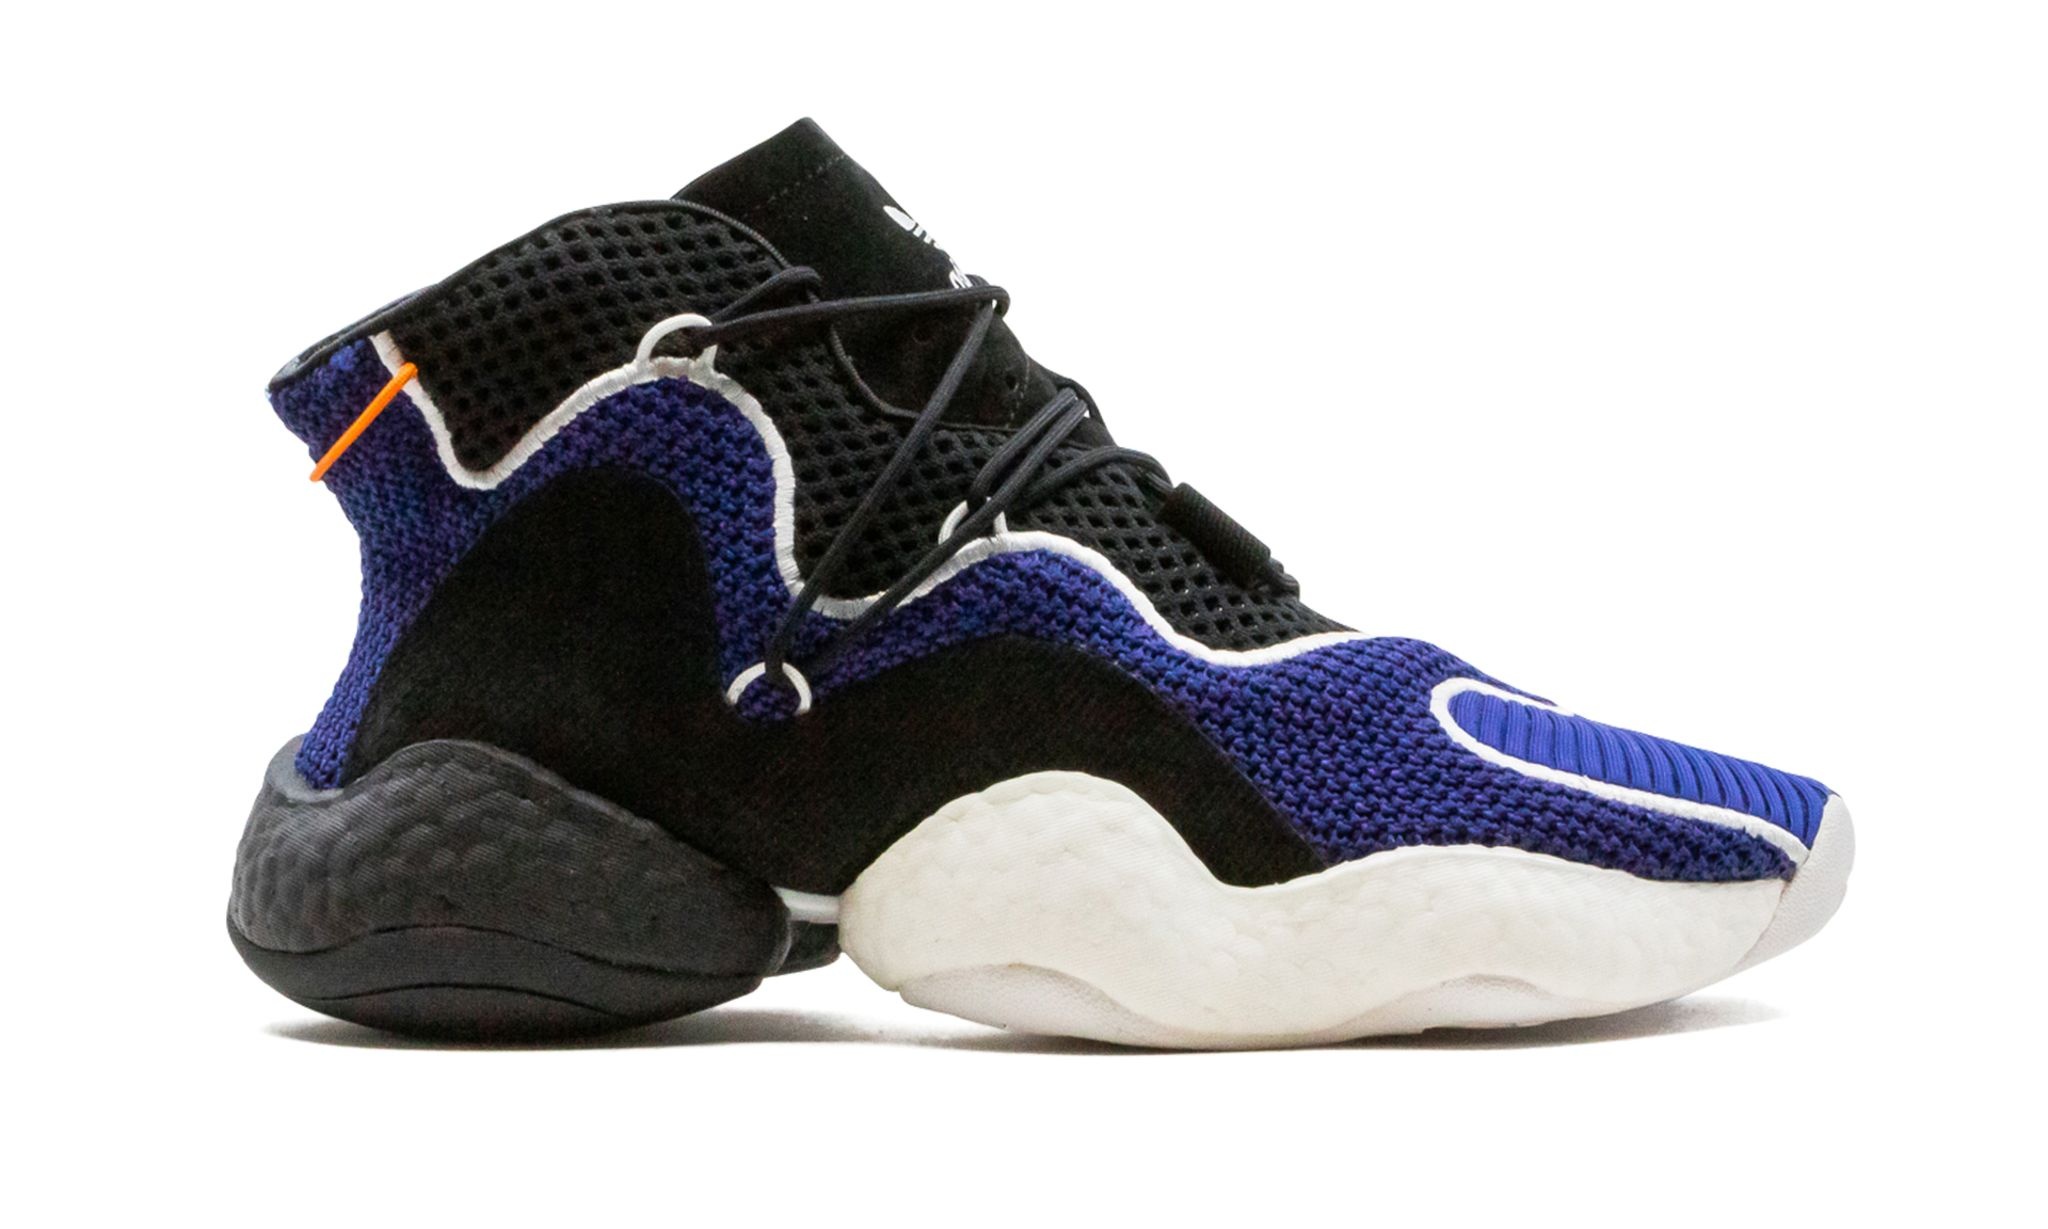 Crazy BYW   "747 Warehouse Exclusive" - 7